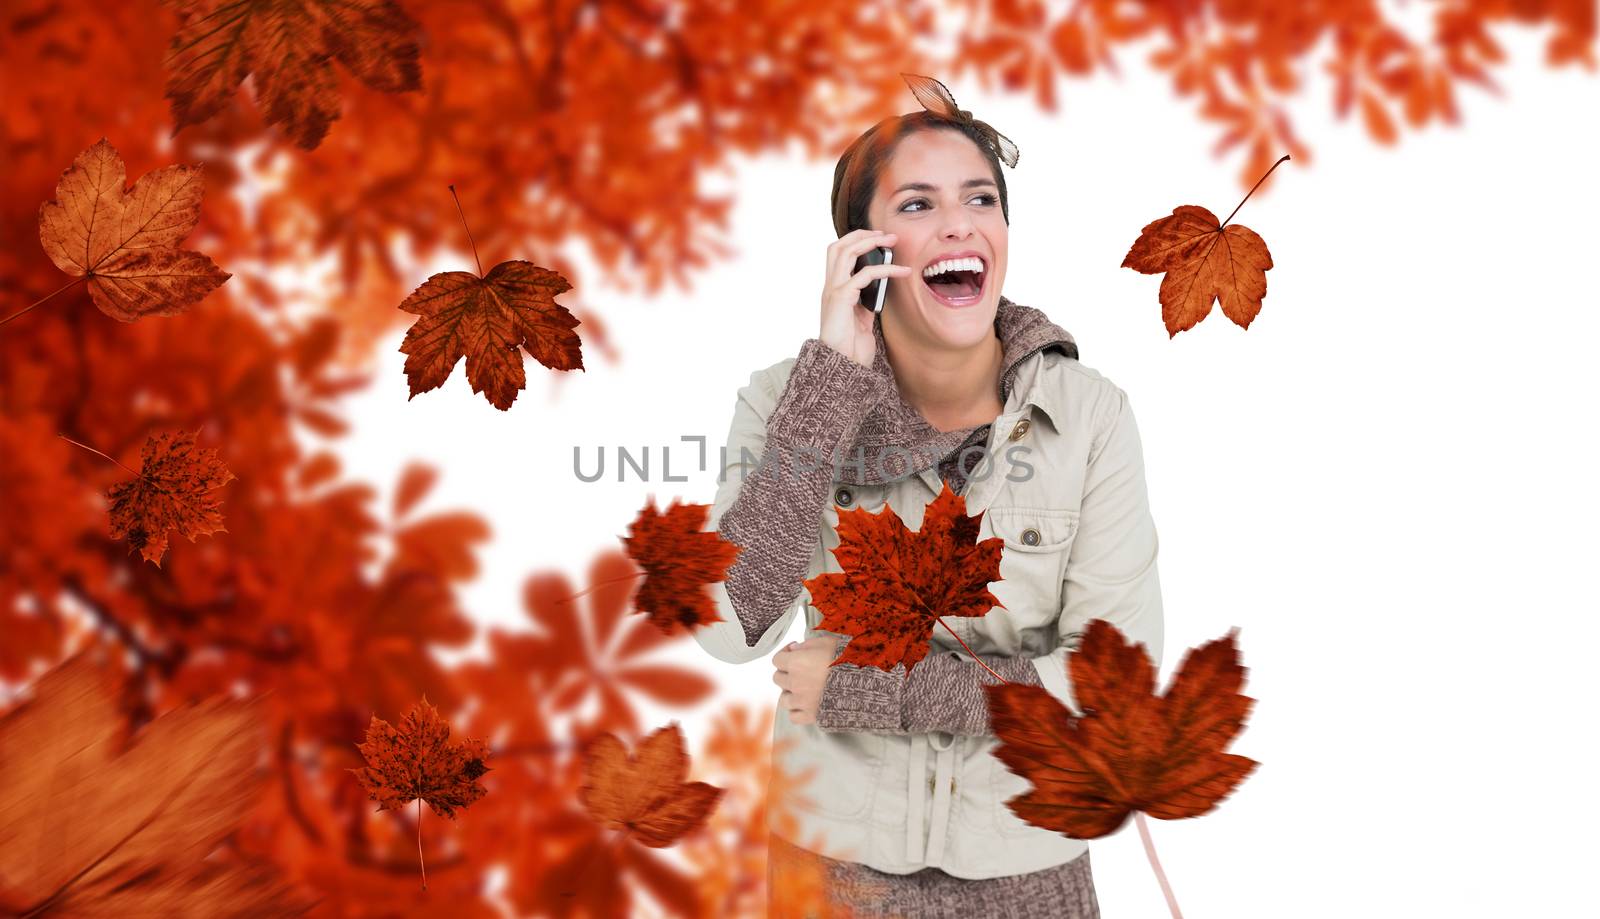 Laughing cute brunette in winter fashion phoning against autumn leaves pattern